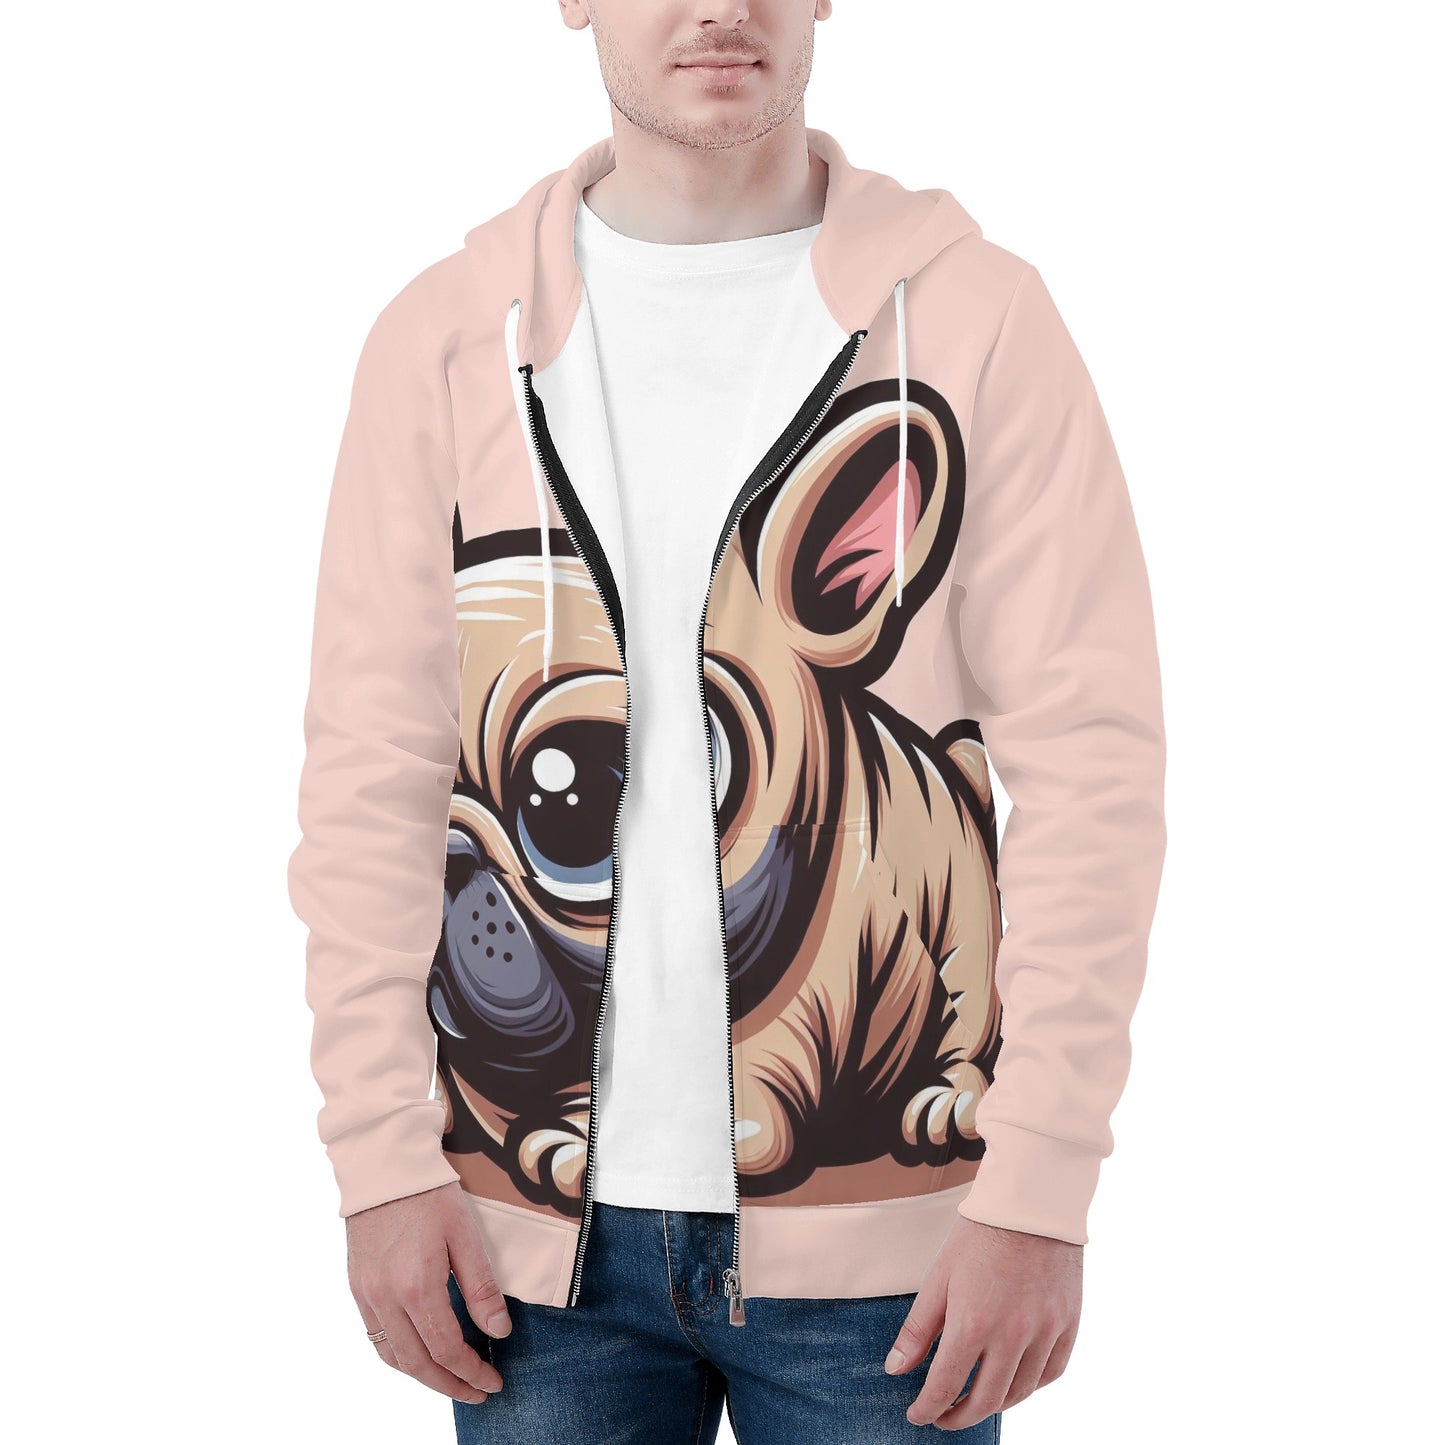 Piper - All Over Print Zip Up Hoodie